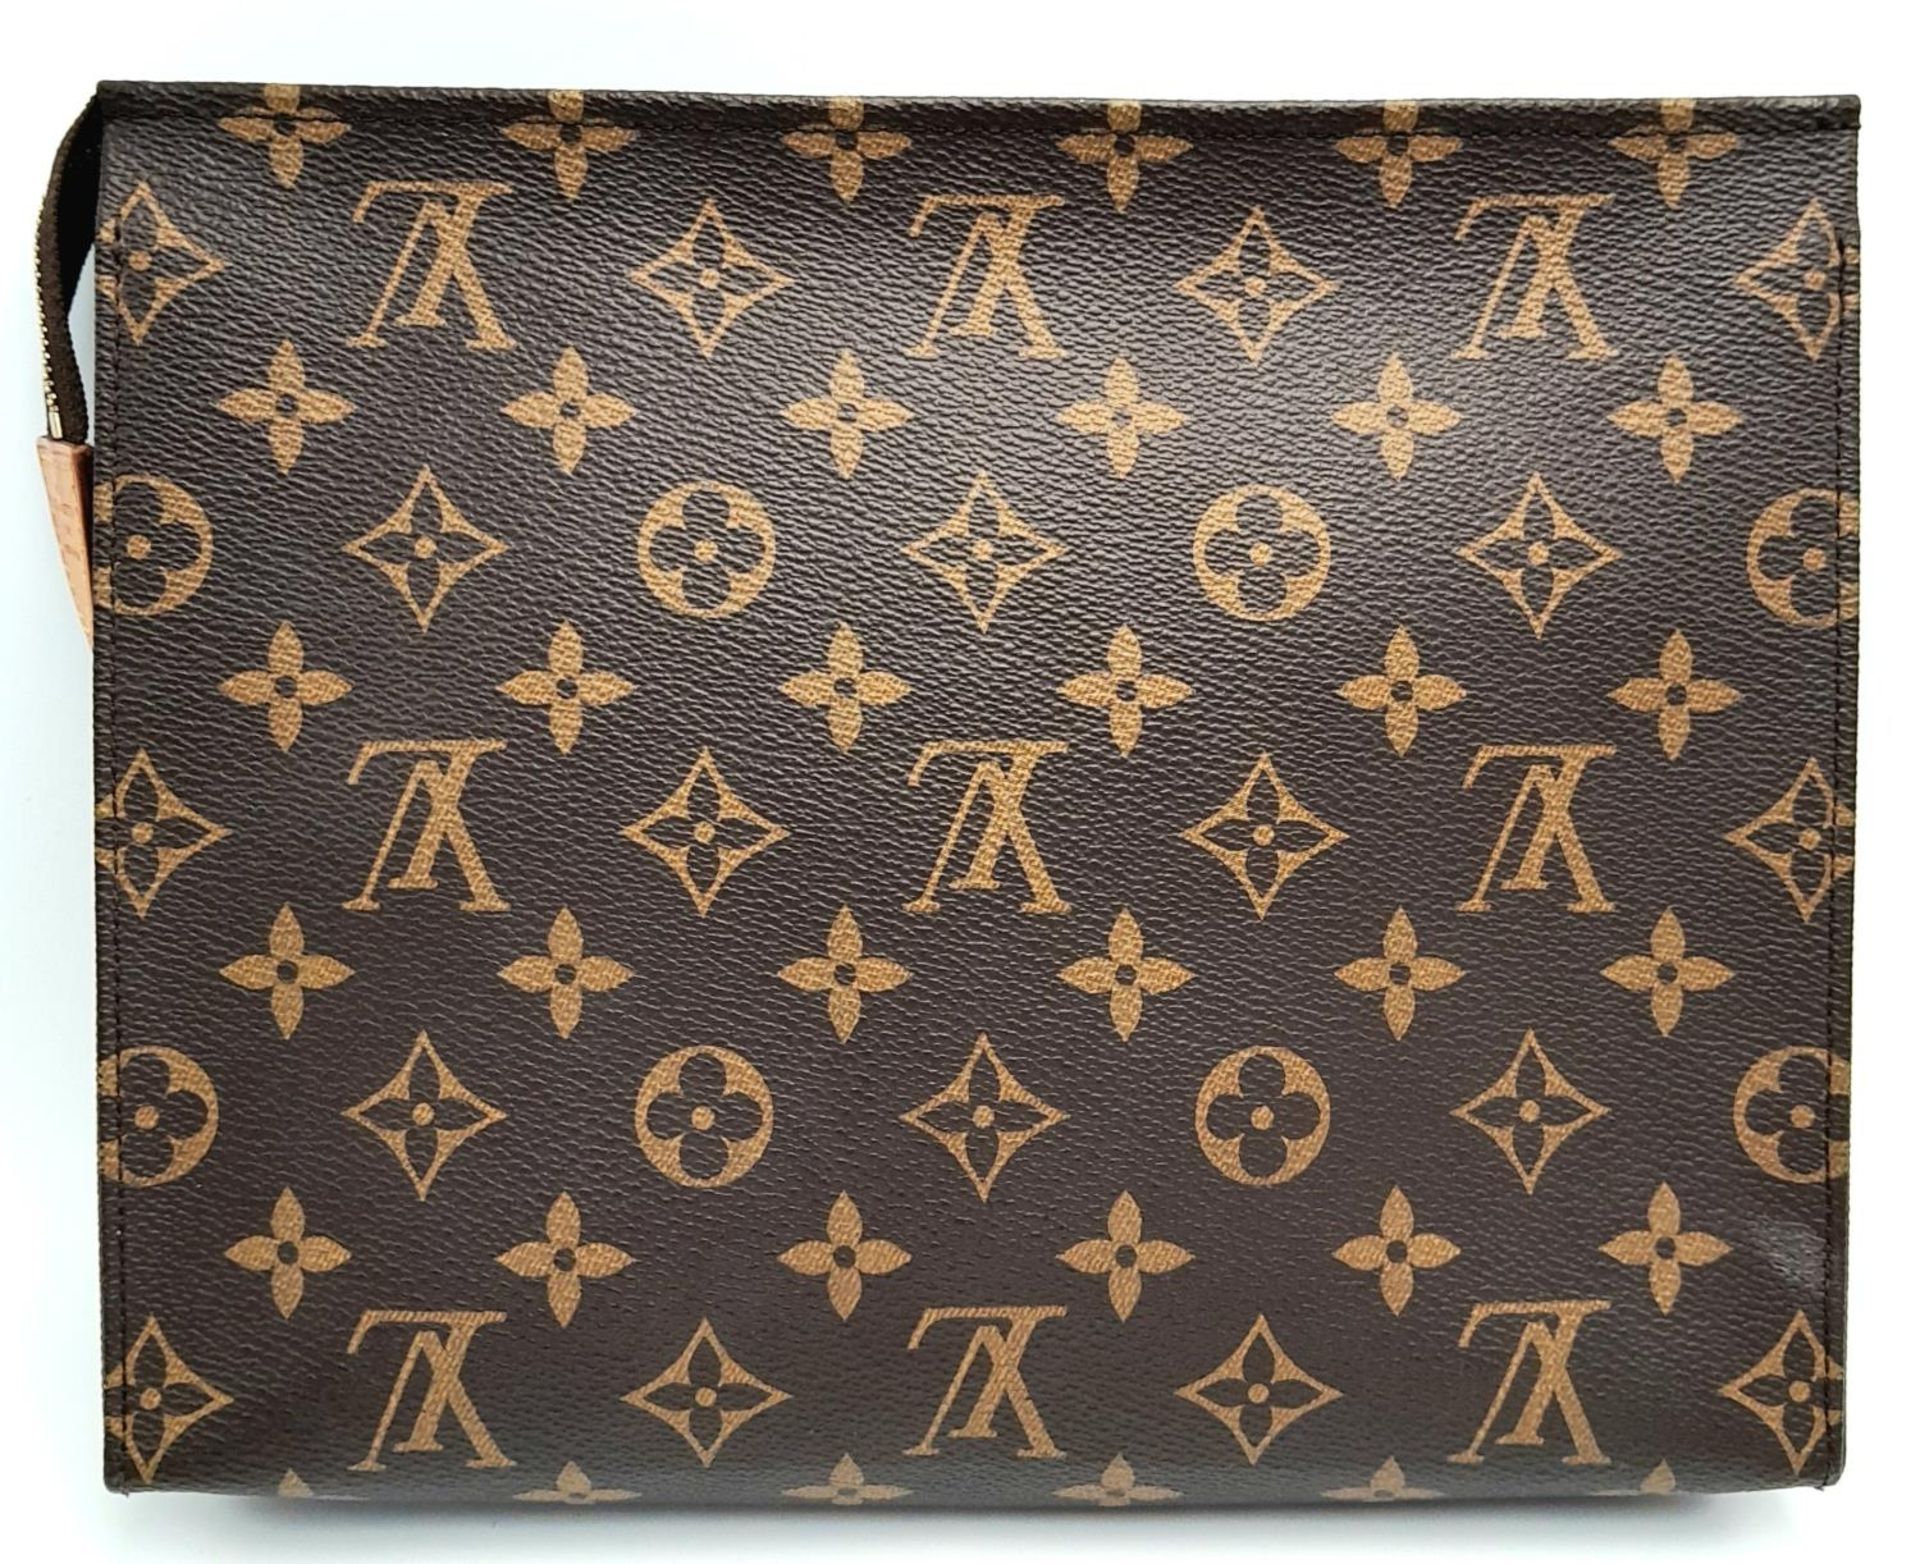 A Louis Vuitton Toiletries Pouch. Monogramed canvas exterior with gold-toned hardware and zipped top - Bild 4 aus 9